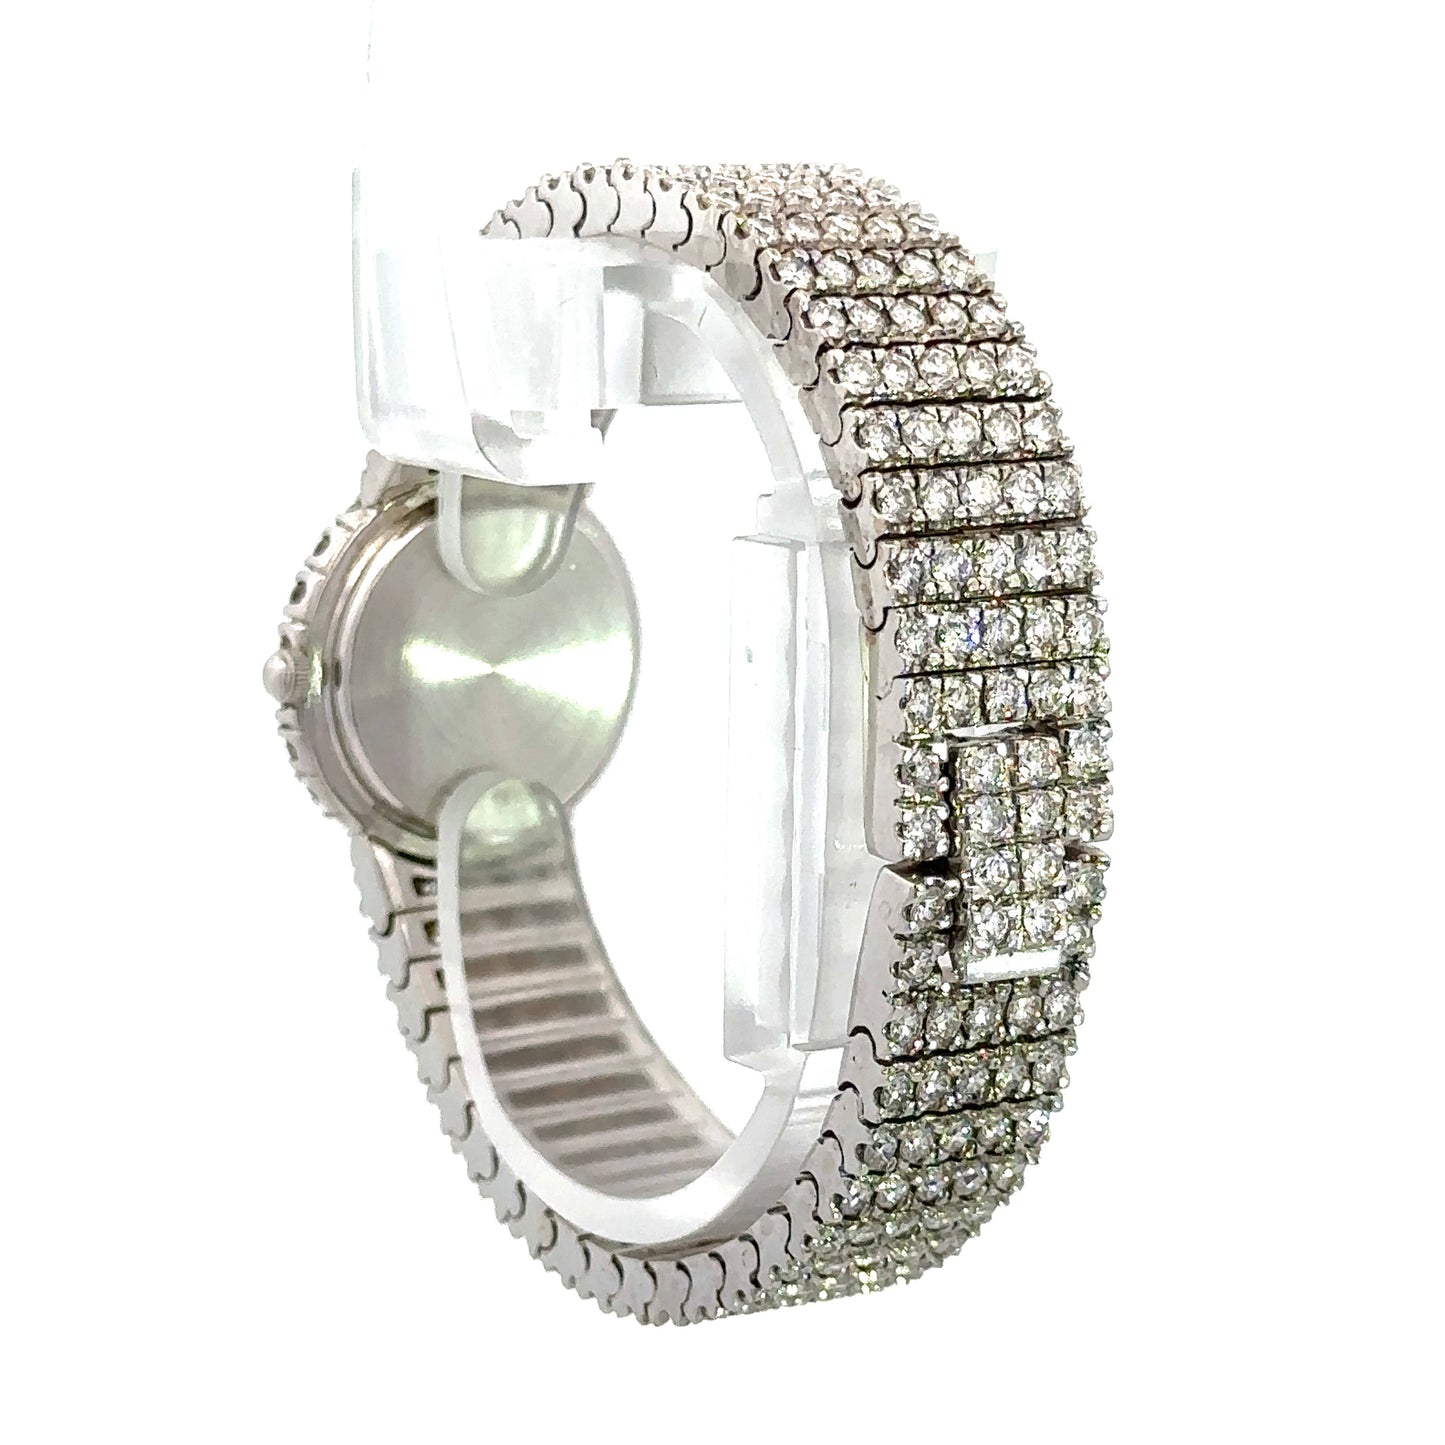 Diagonal back of diamond watch in white gold with rows of 5 round diamonds throughout the band